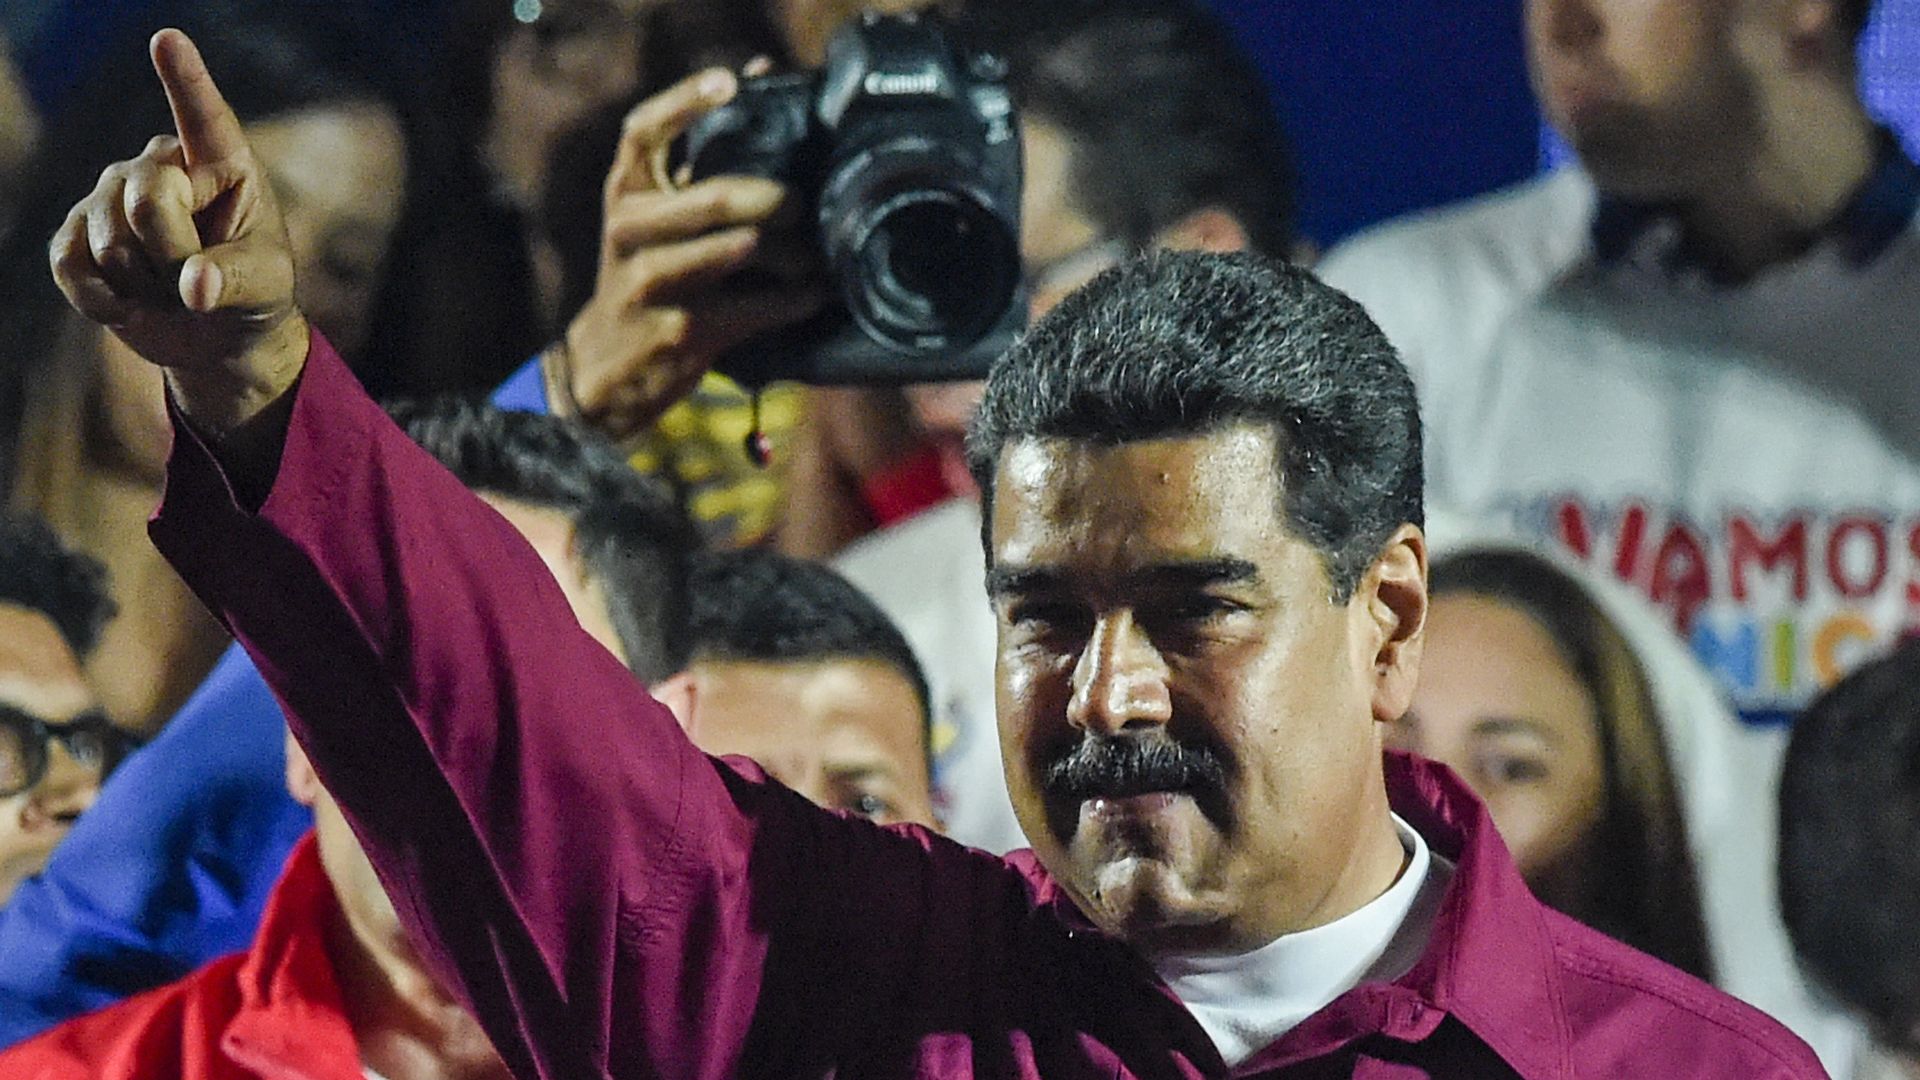 Venezuelan President Nicolas Maduro gestures after the National Electoral Council (CNE) announced the results of the voting on election day in Venezuela, on May 20, 2018.